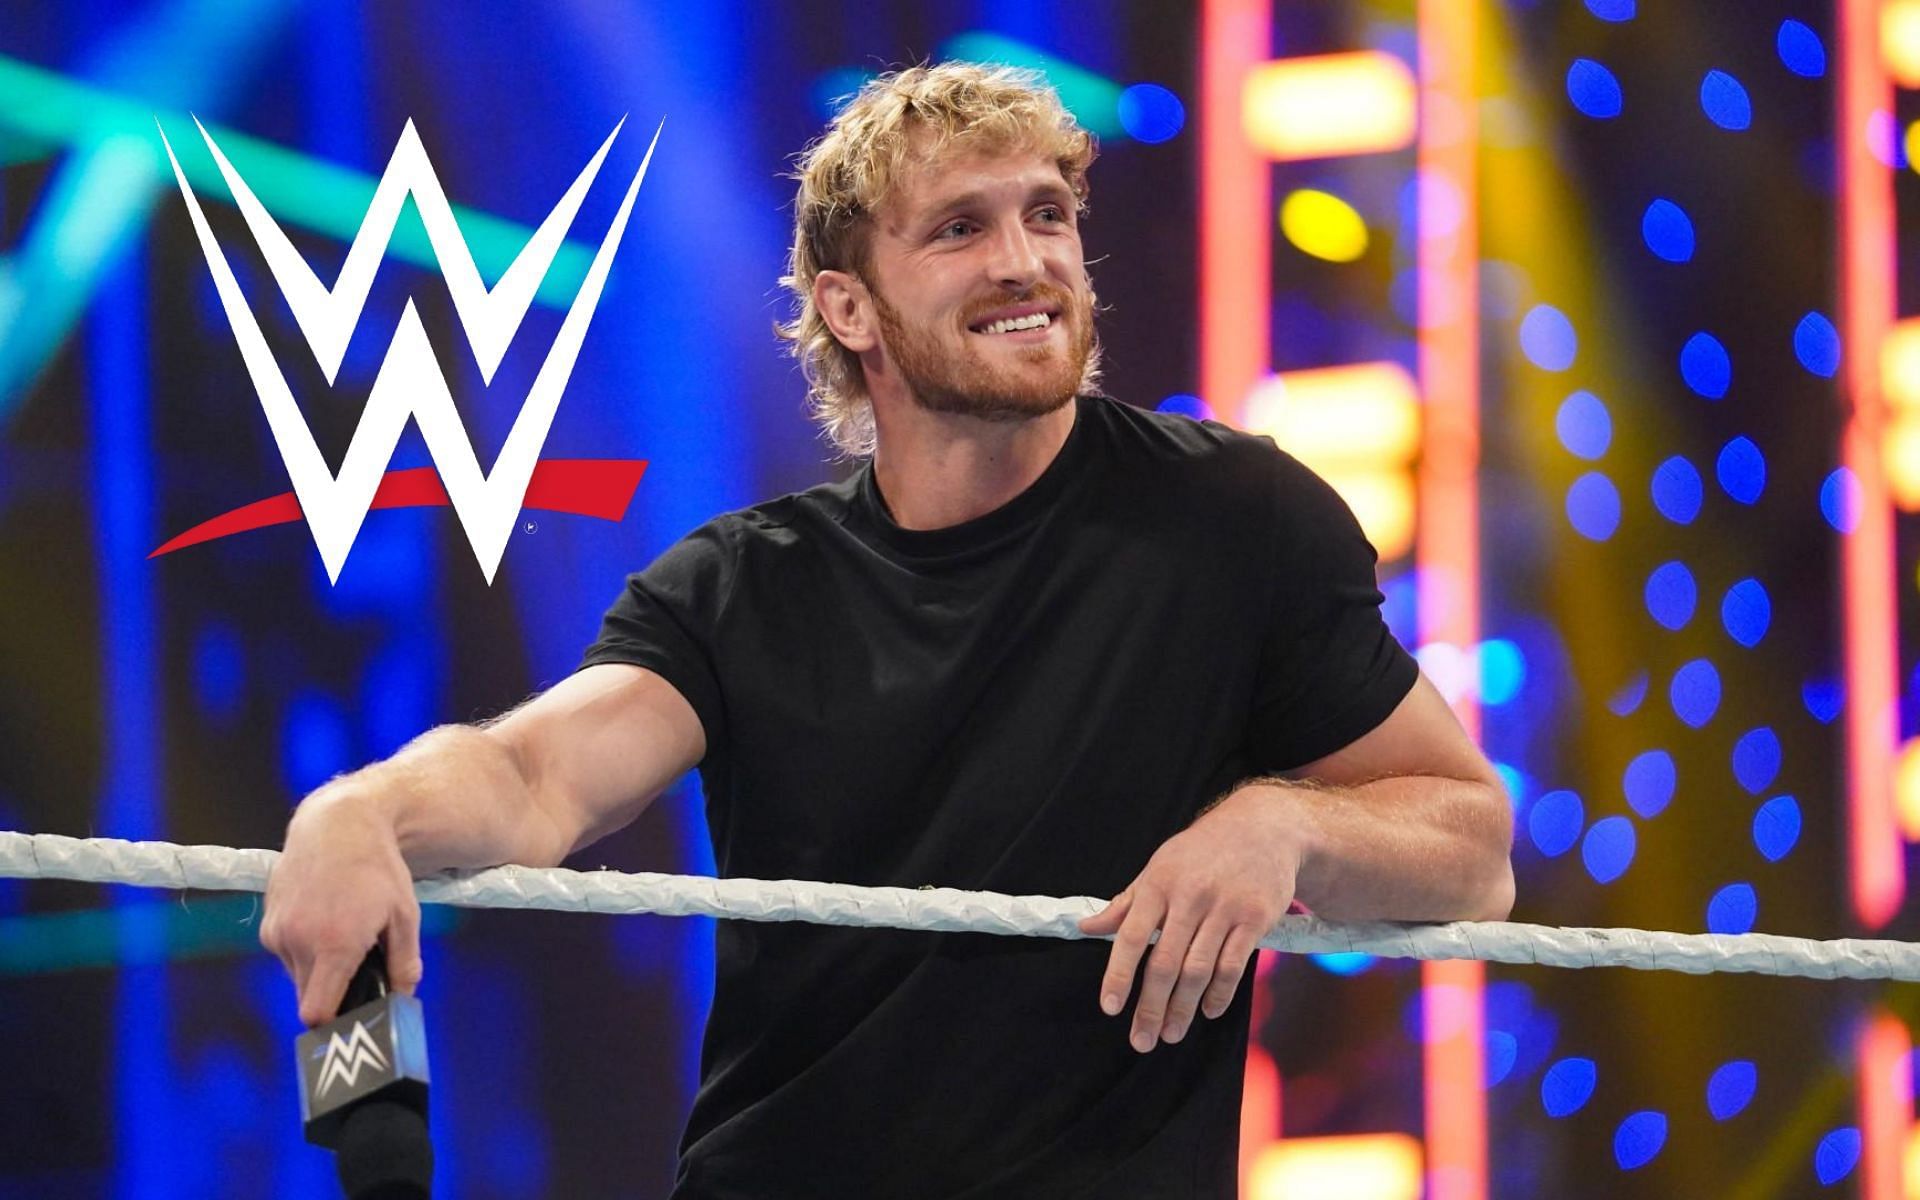 Logan Paul signed a multi-year contract with WWE 